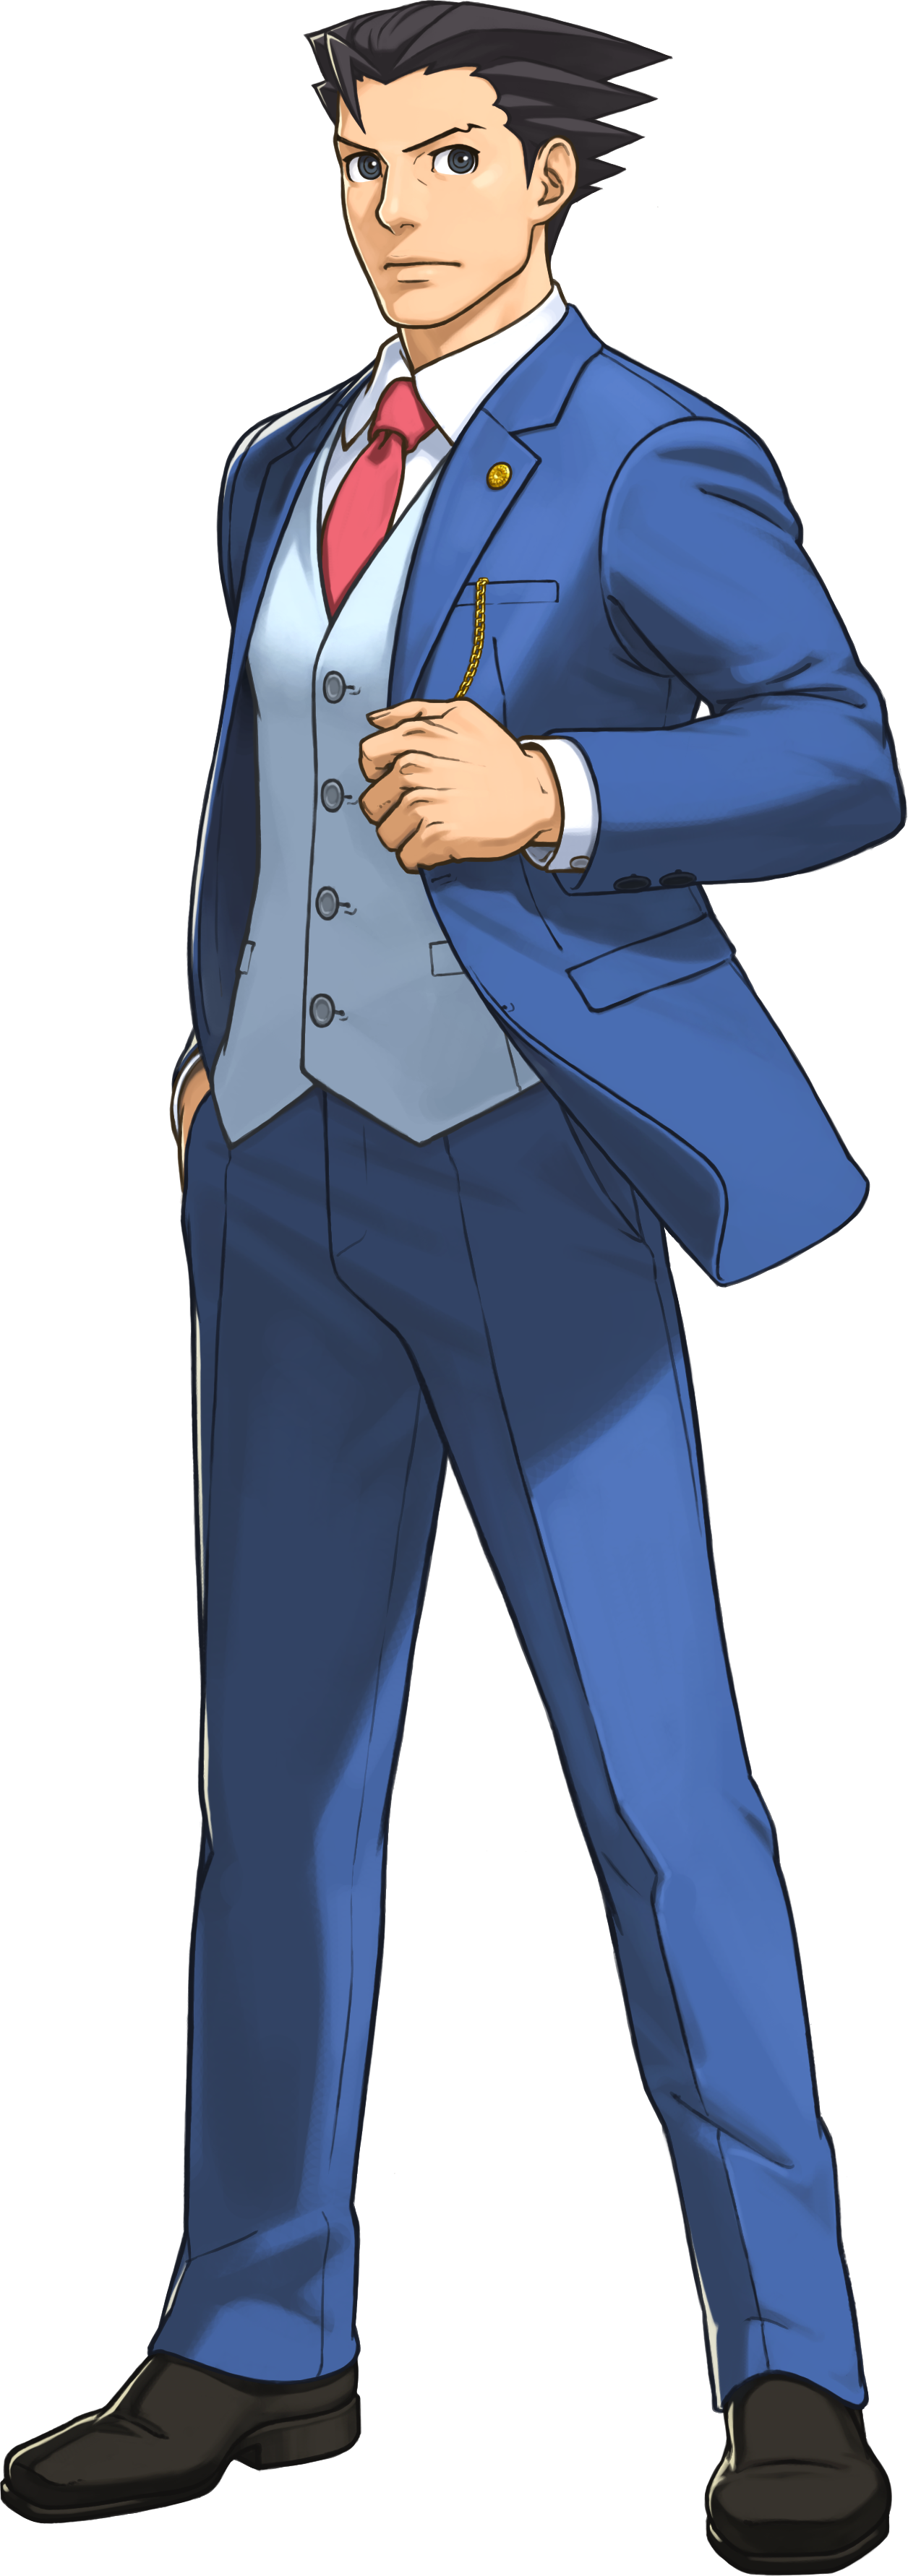 Ace Attorney Transparent, Ace Attorney PNG - Free PNG